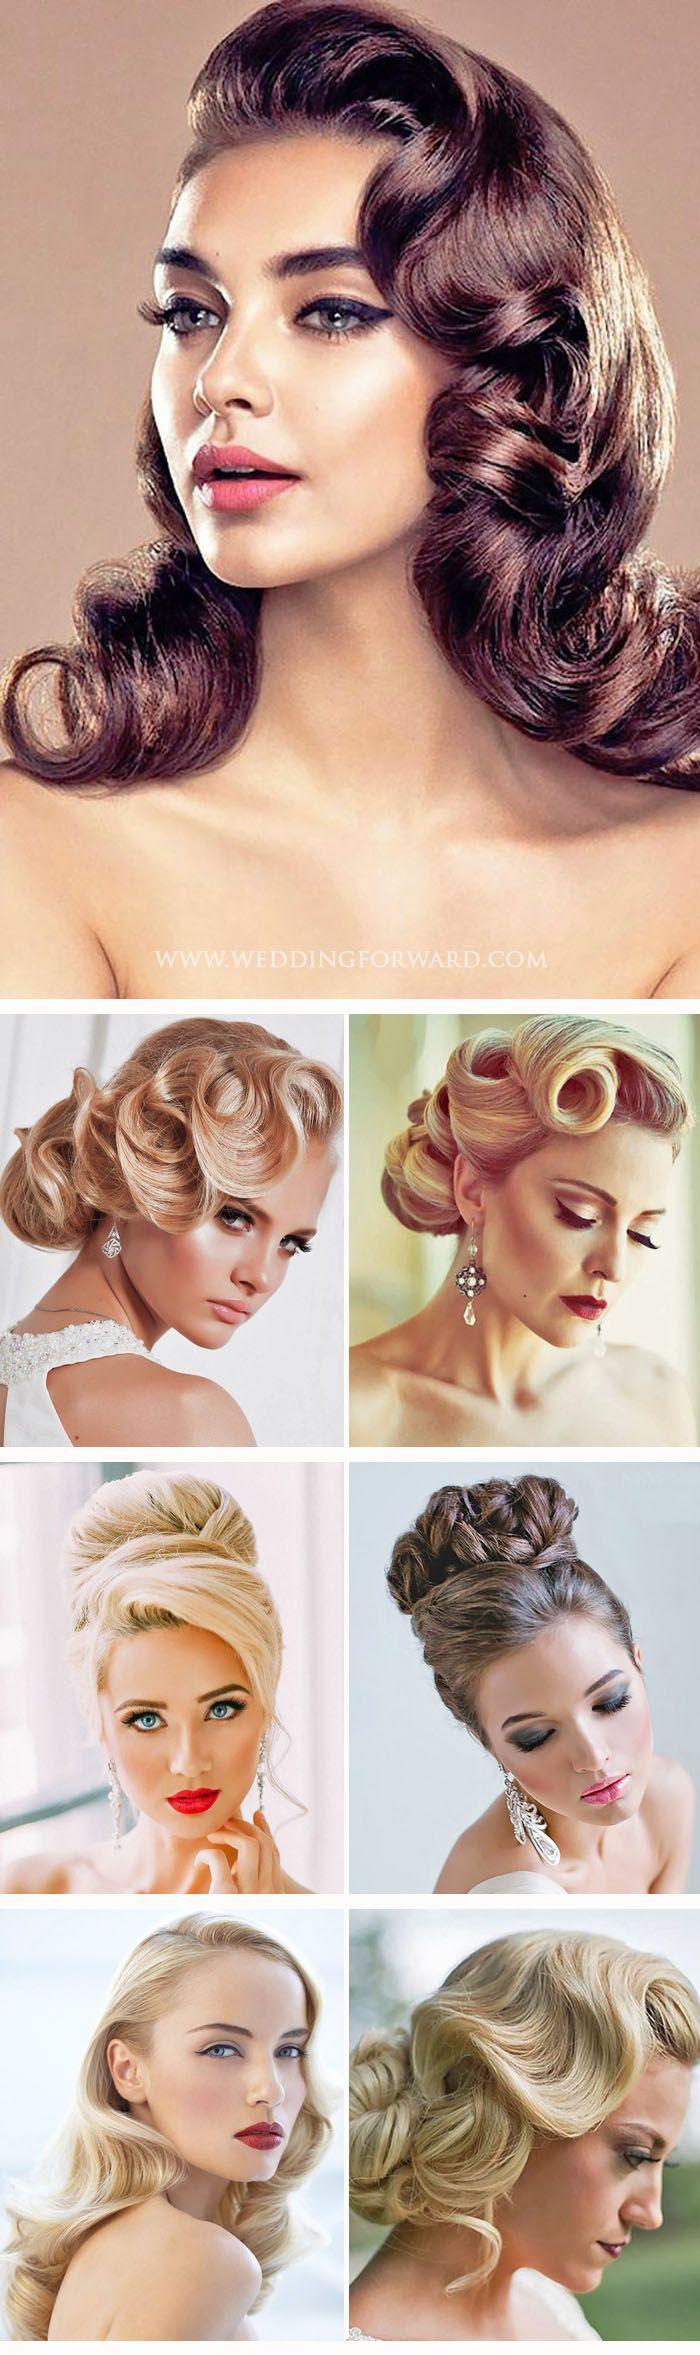 Wedding - 45 Undercut Hairstyles With Hair Tattoos For Women